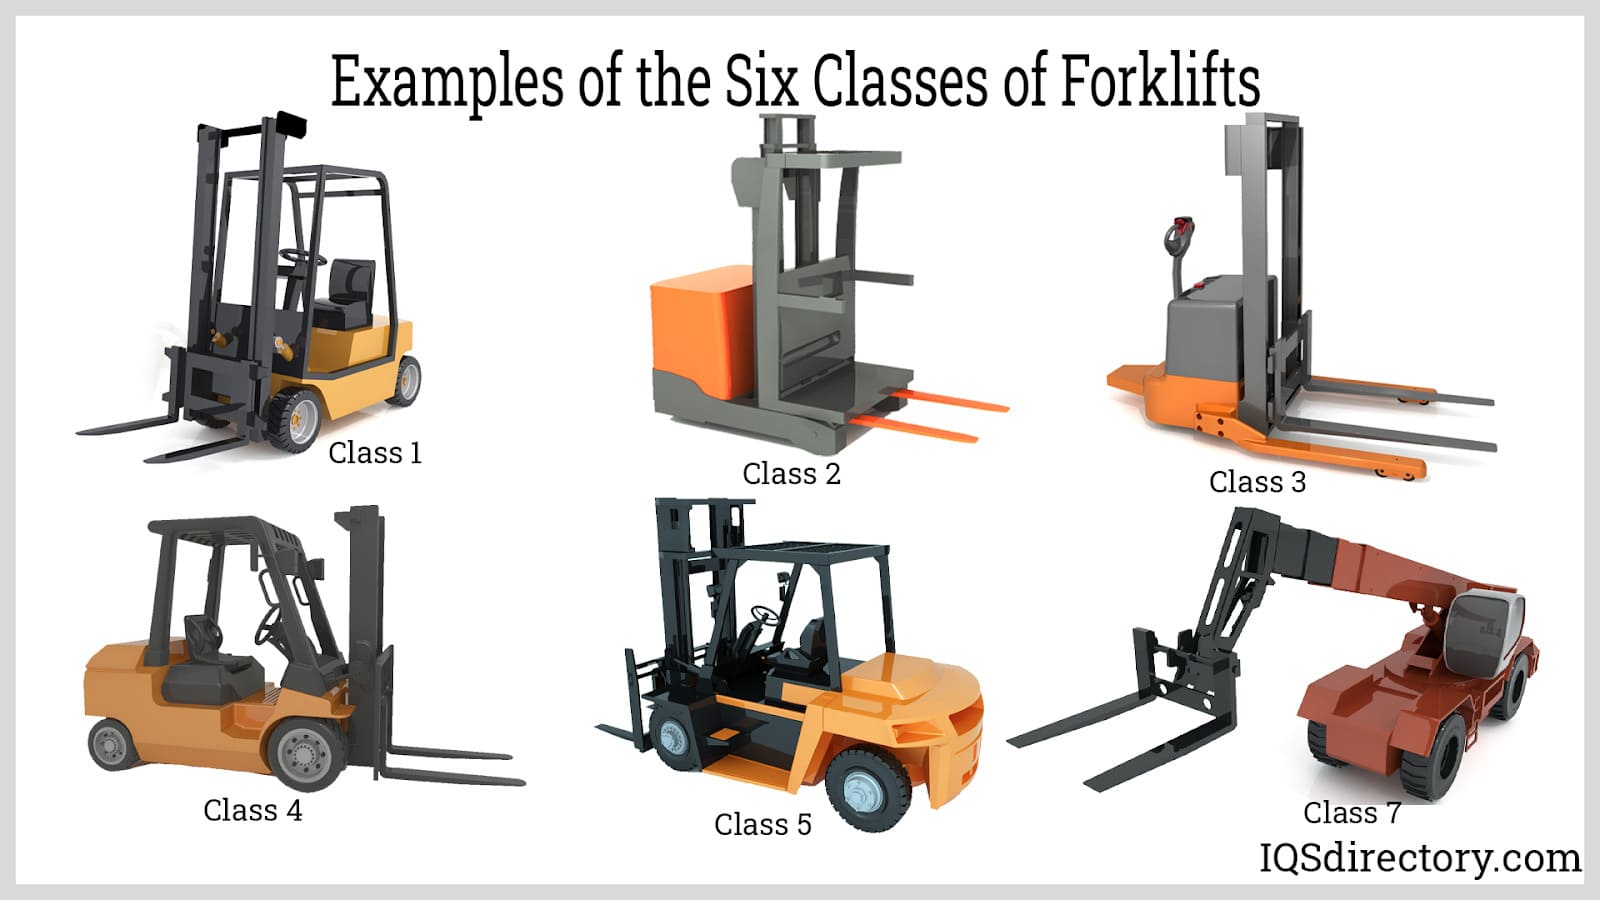 Examples of the Six Classes of Forklifts